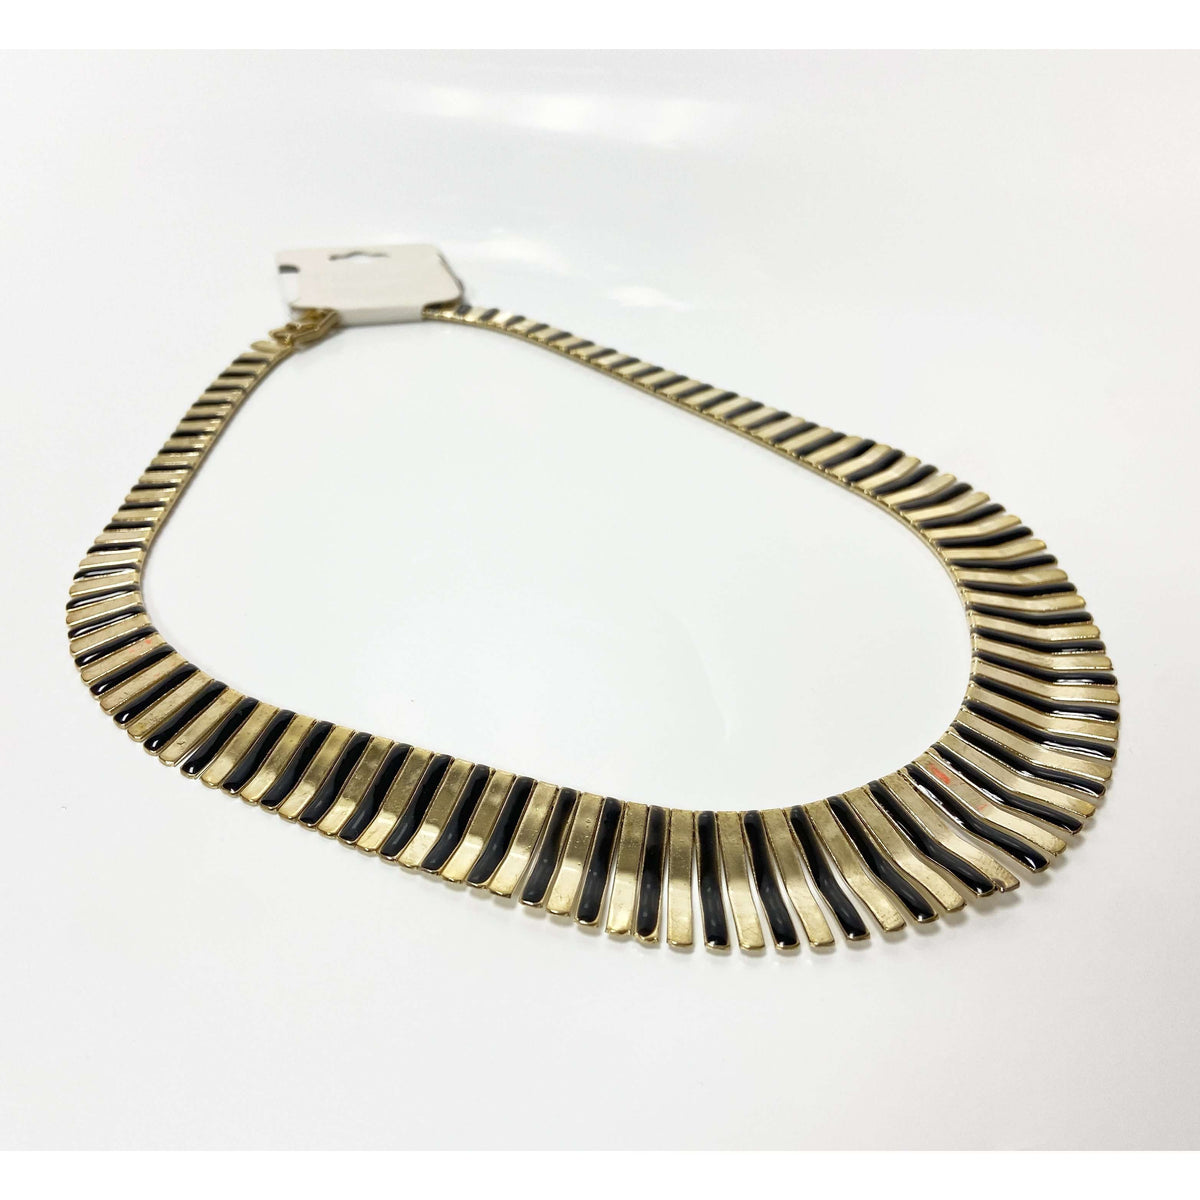 Black and Gold Egyptian Necklace